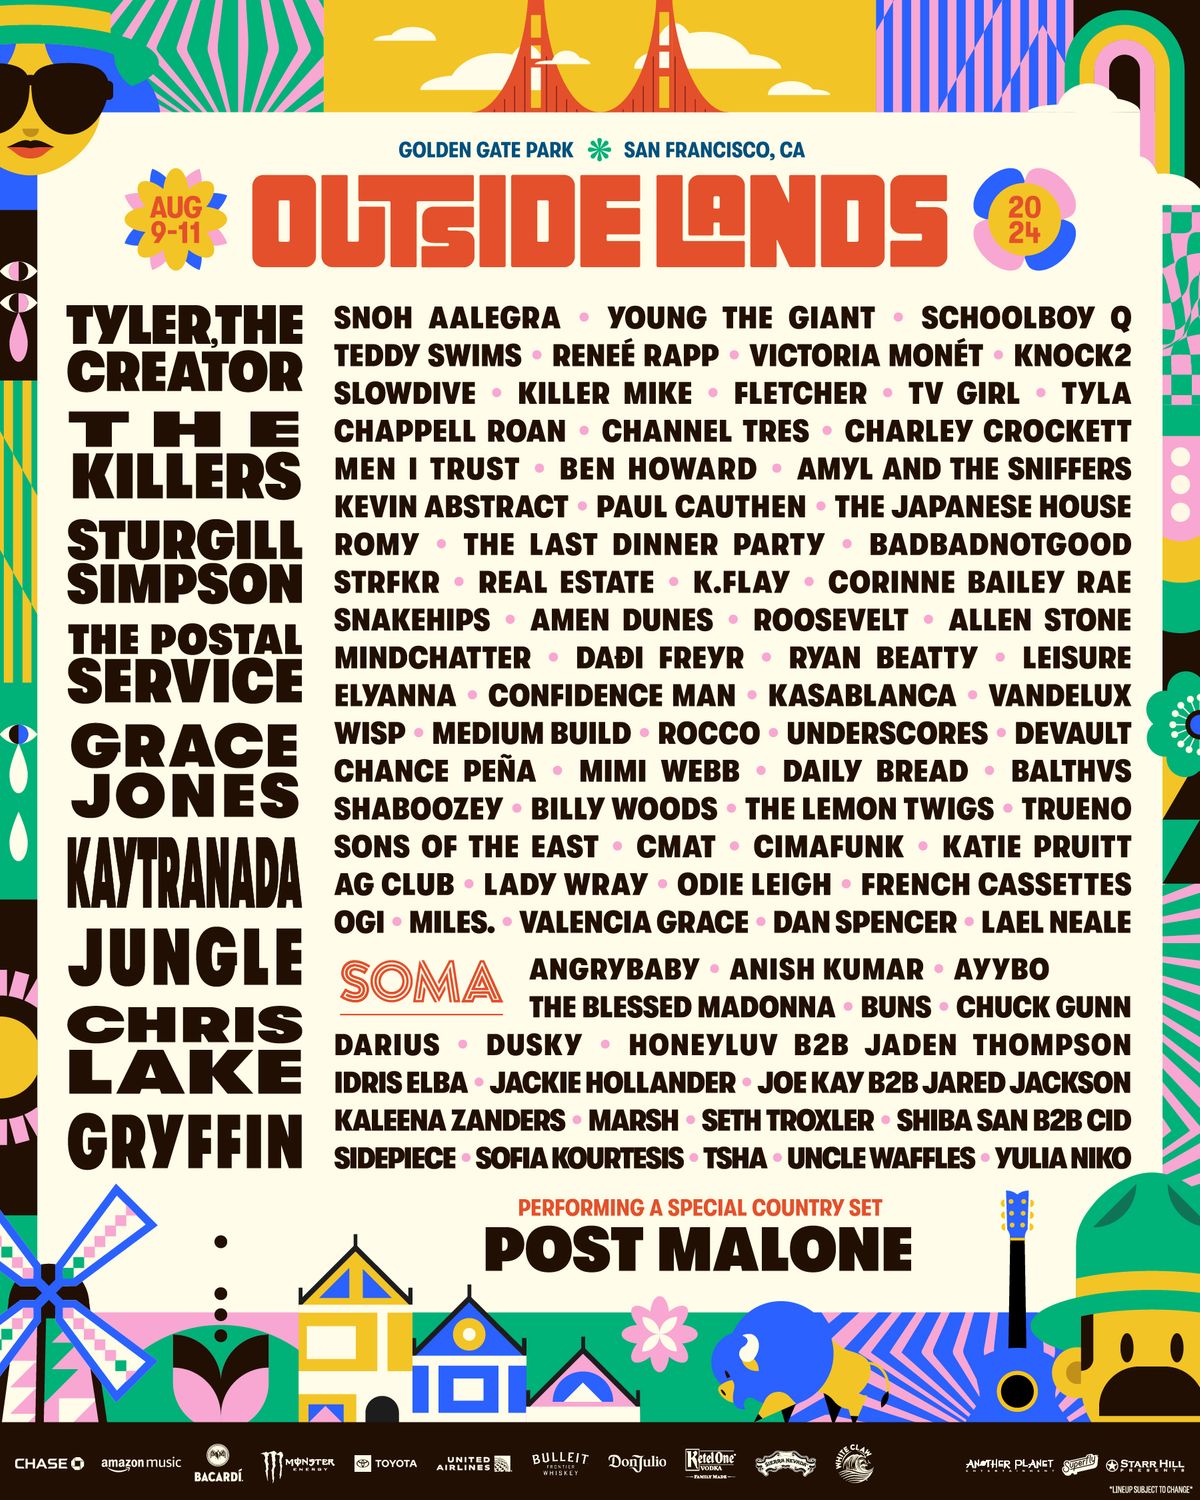 Outside Lands 2024 Lineup: Tyler The Creator, The Killers, Sturgill Simpson, The Postal Service, Grace Jones, Kaytranada, Jungle, Chris Lake, Griffin, Post Malone, Snoh Aalegra, Young the Giant, ScHoolboy Q, Teddy Swims, Renee Rapp, Victoria Monet, Knock2,